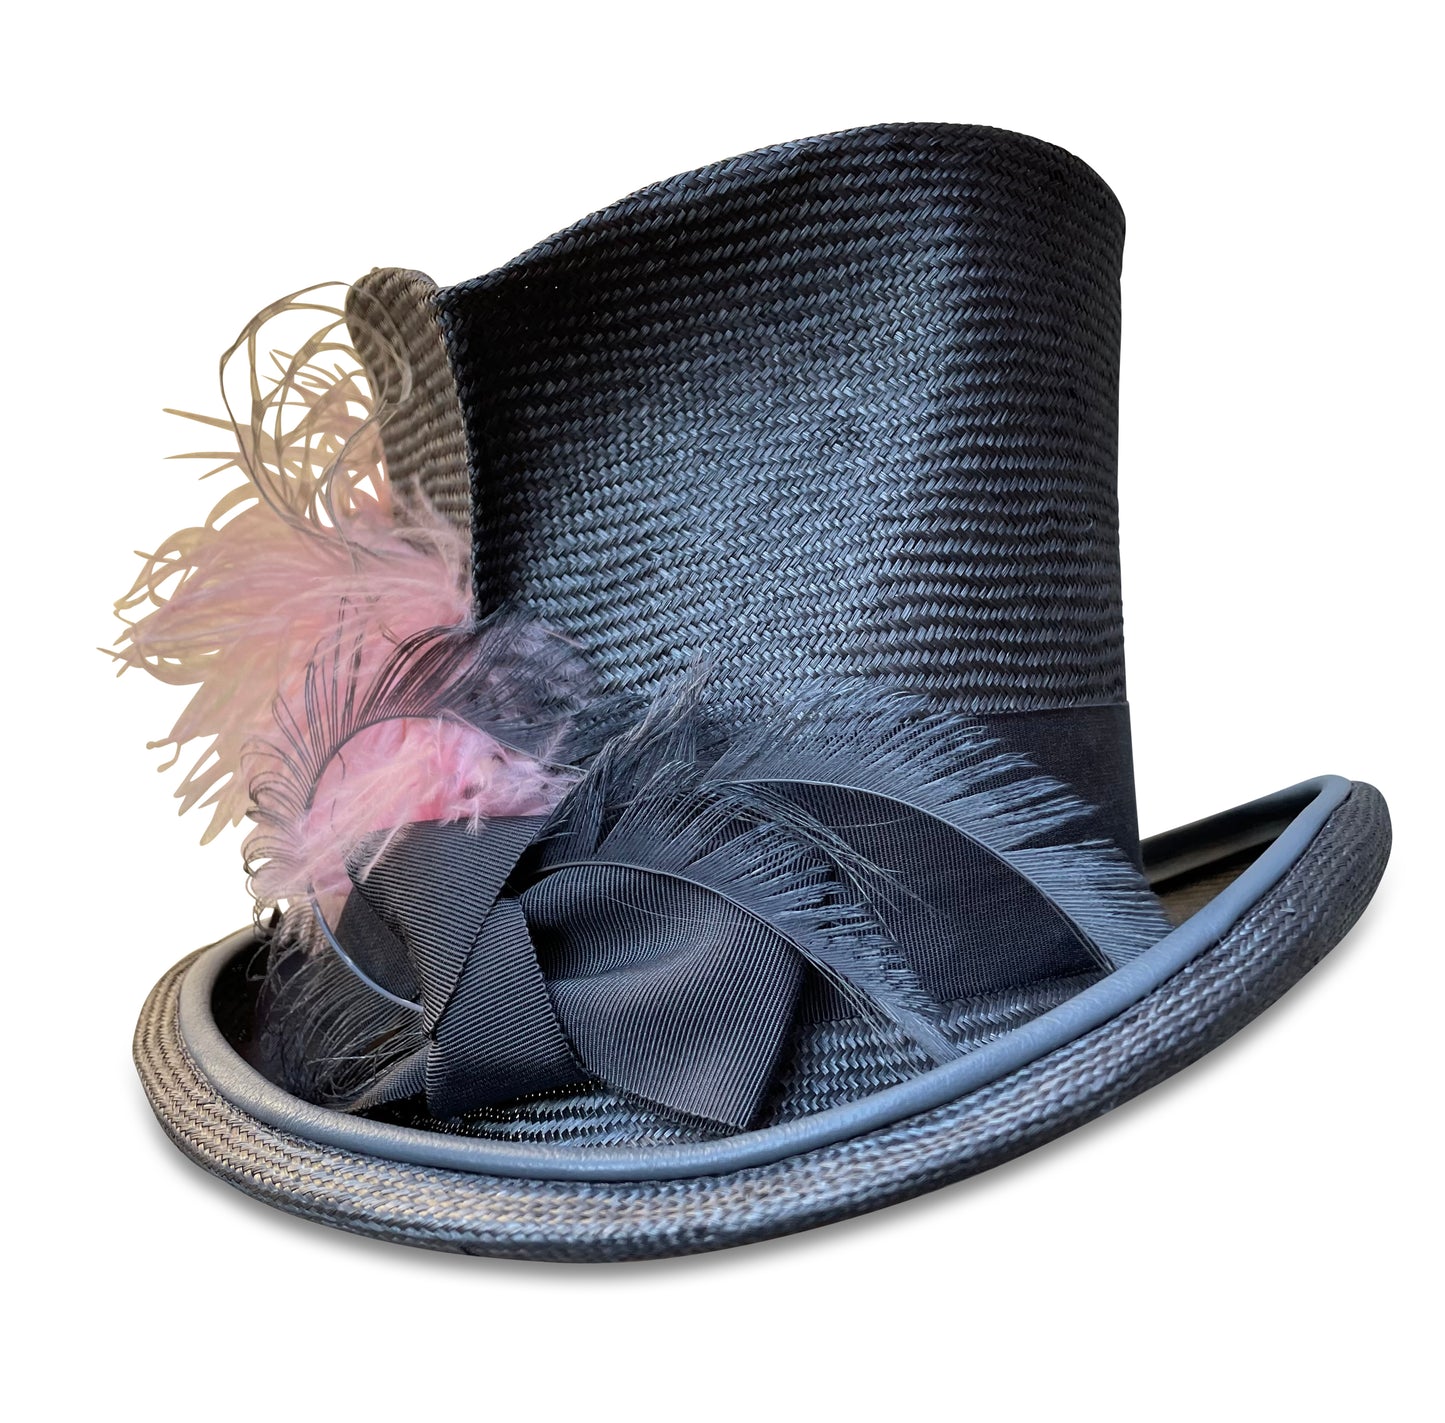 Unique Top Hat for women from Cha Cha's House of Ill Repute in NYC